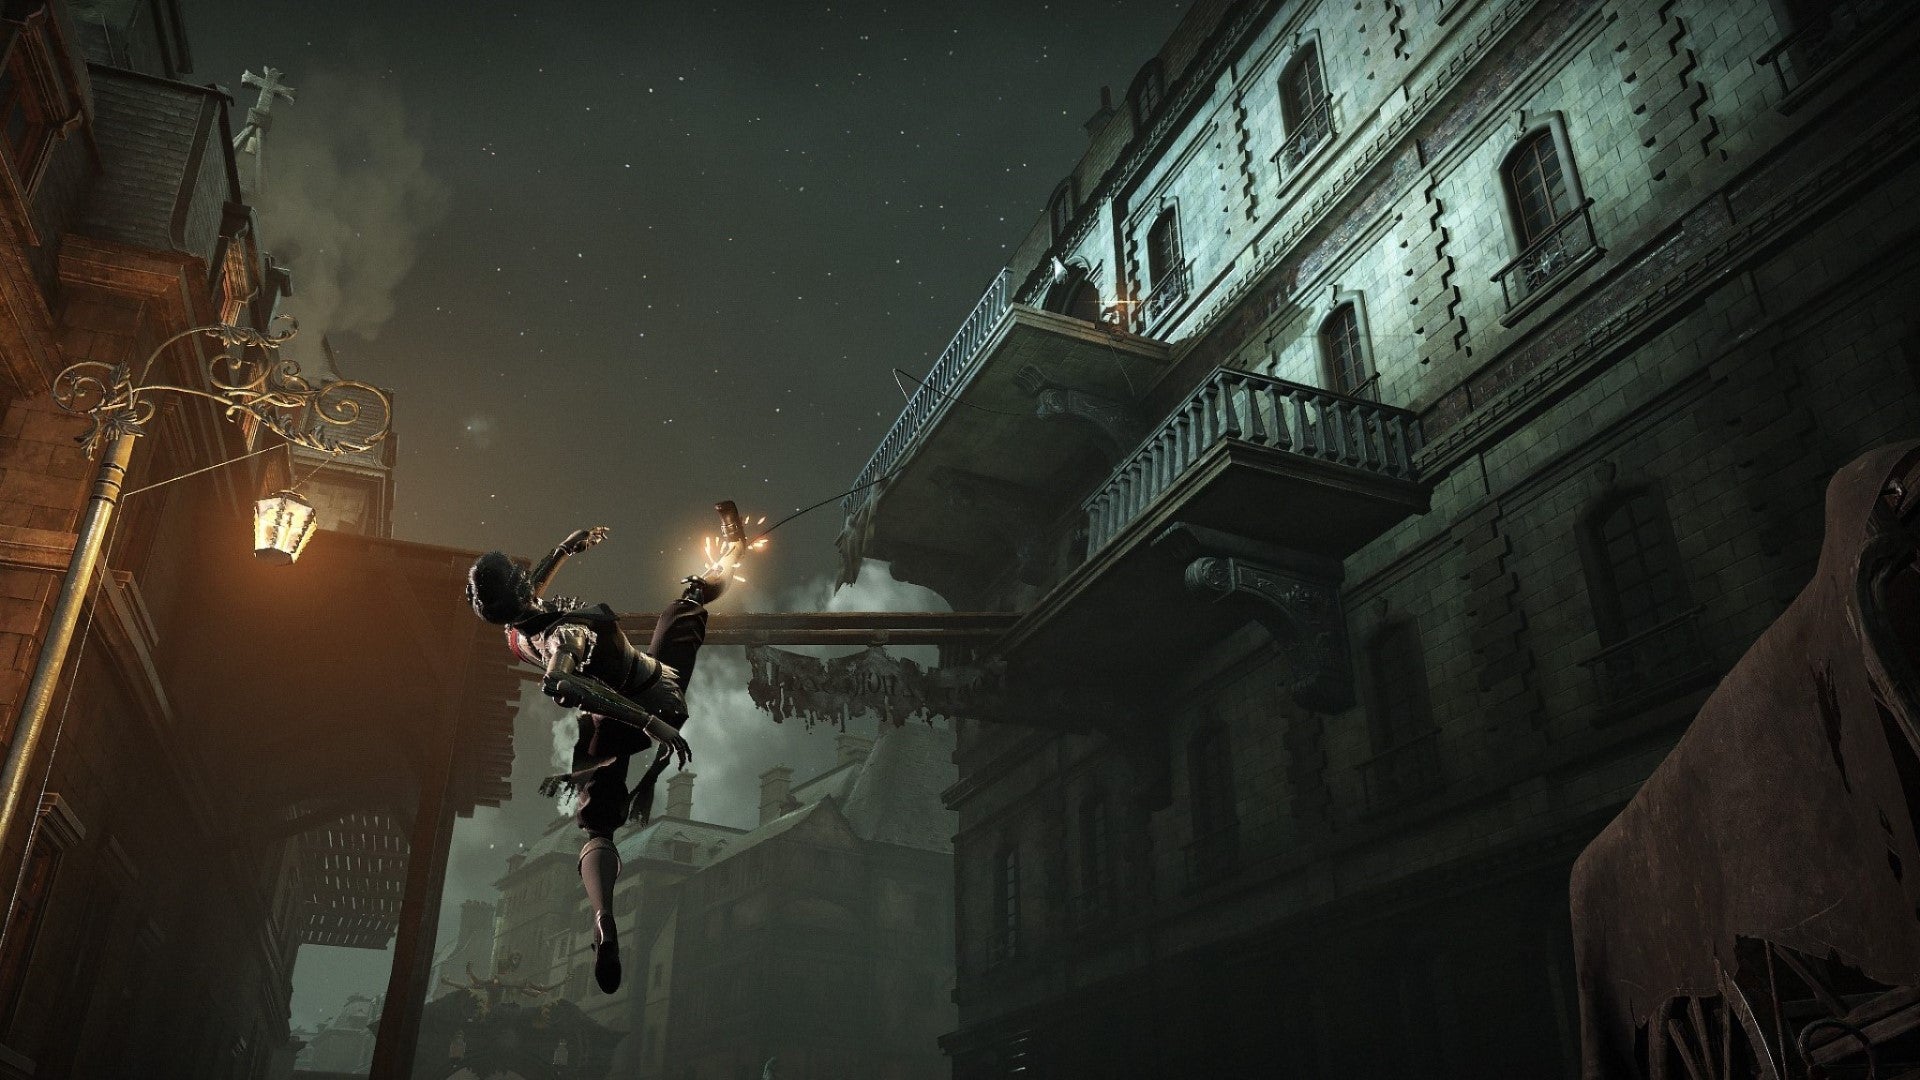 Aegis grapples up to a balcony in Steelrising.